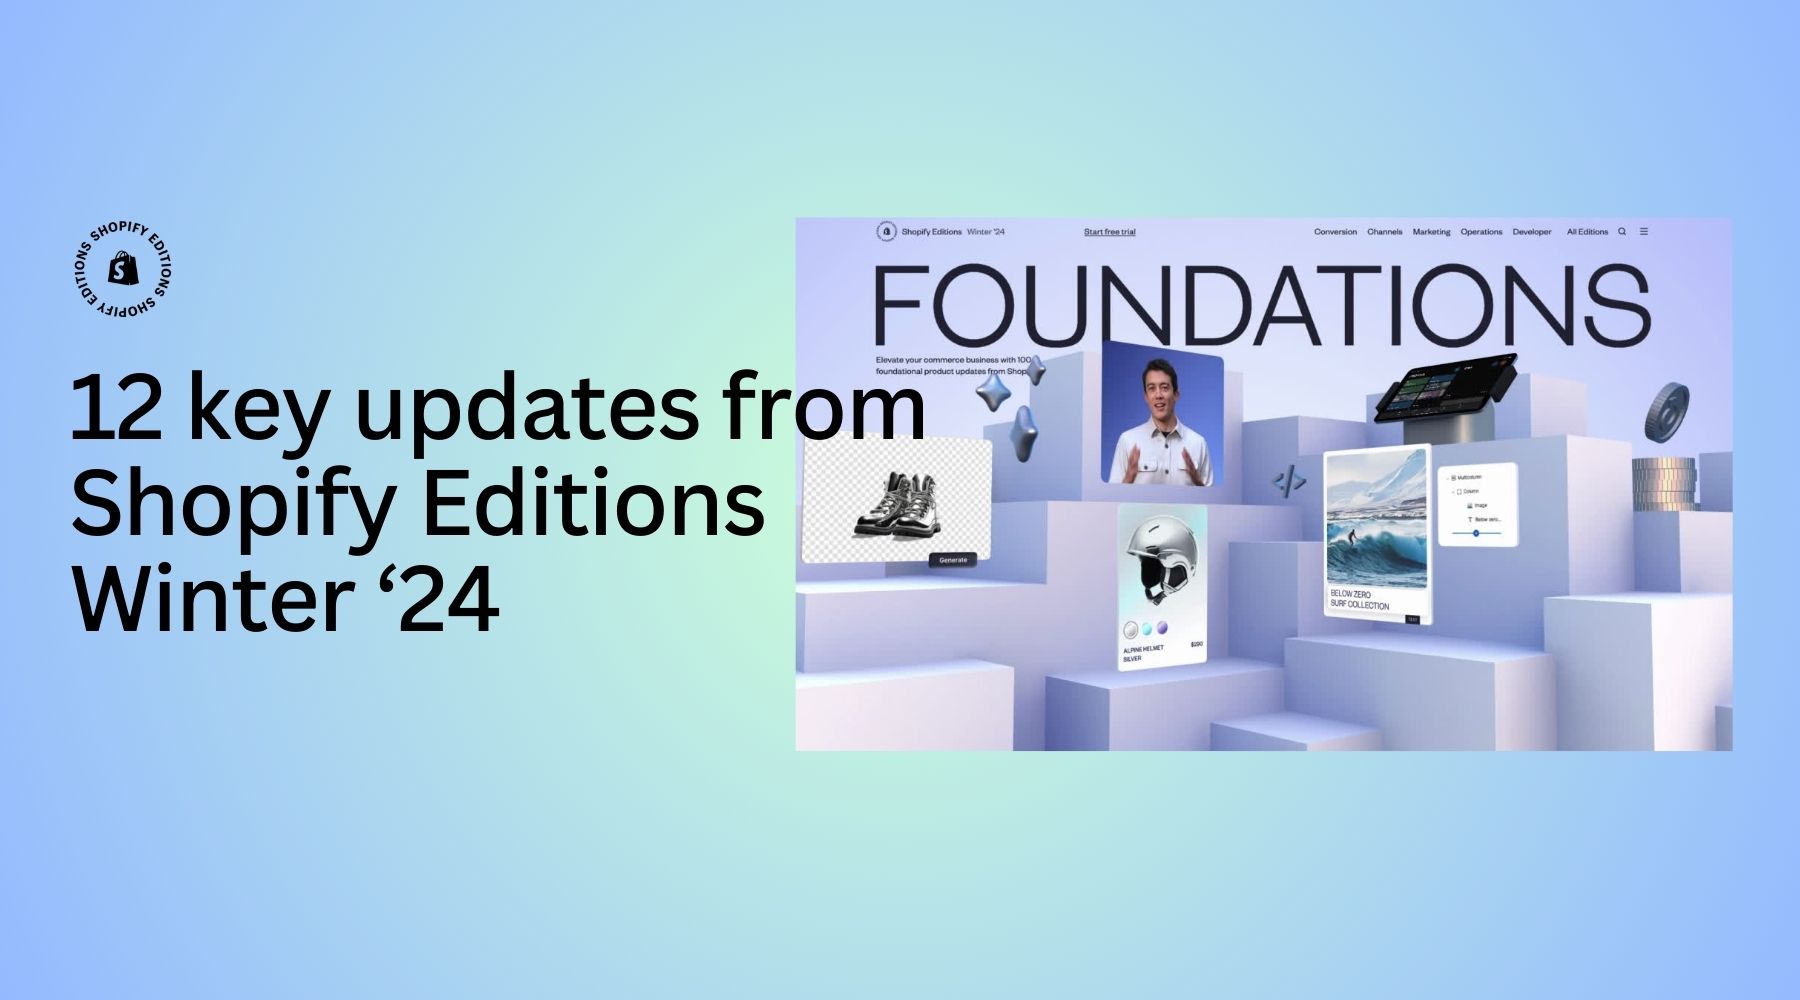 Shopify Editions Winter ‘24  key updates